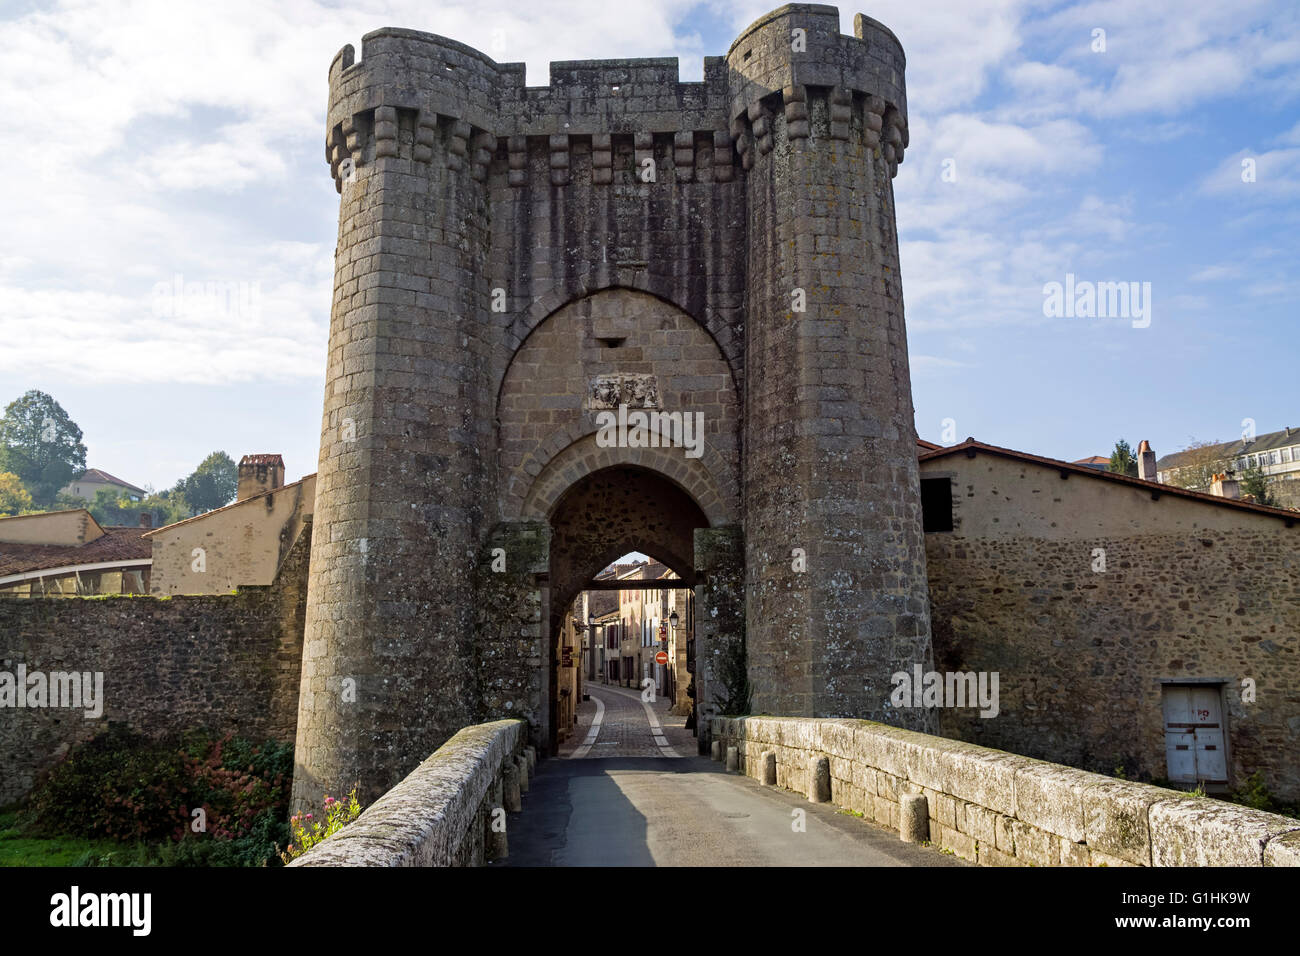 Historical St Jacques Bridge and fortified Gate over the River Thouet in Parthenay, Deux-Sevres, France Stock Photo